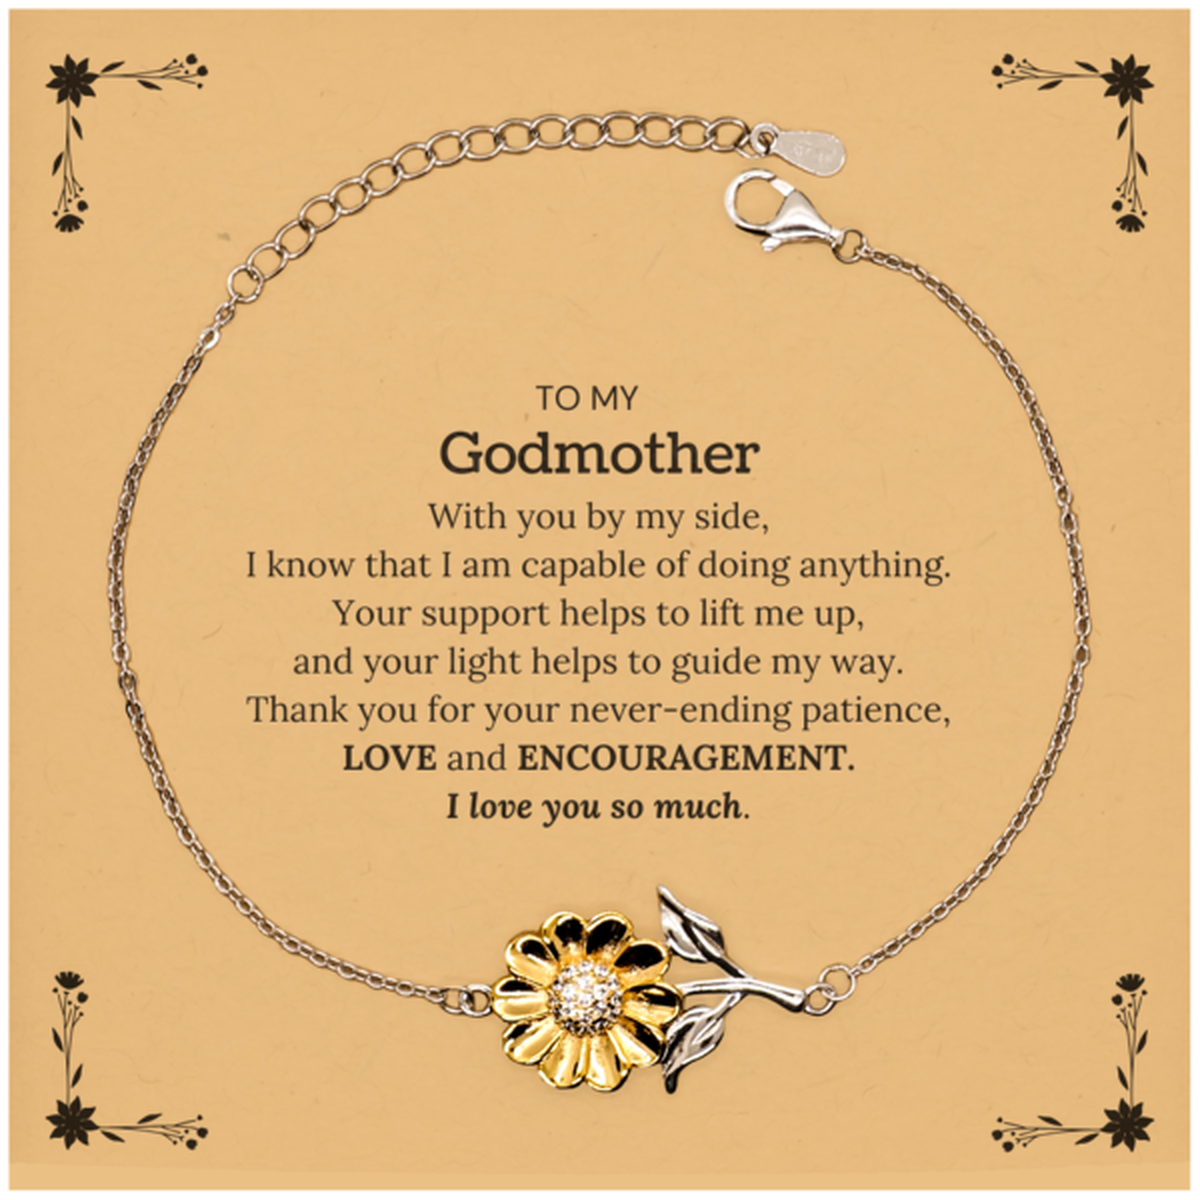 Appreciation Godmother Sunflower Bracelet Gifts, To My Godmother Birthday Christmas Wedding Keepsake Gifts for Godmother With you by my side, I know that I am capable of doing anything. I love you so much